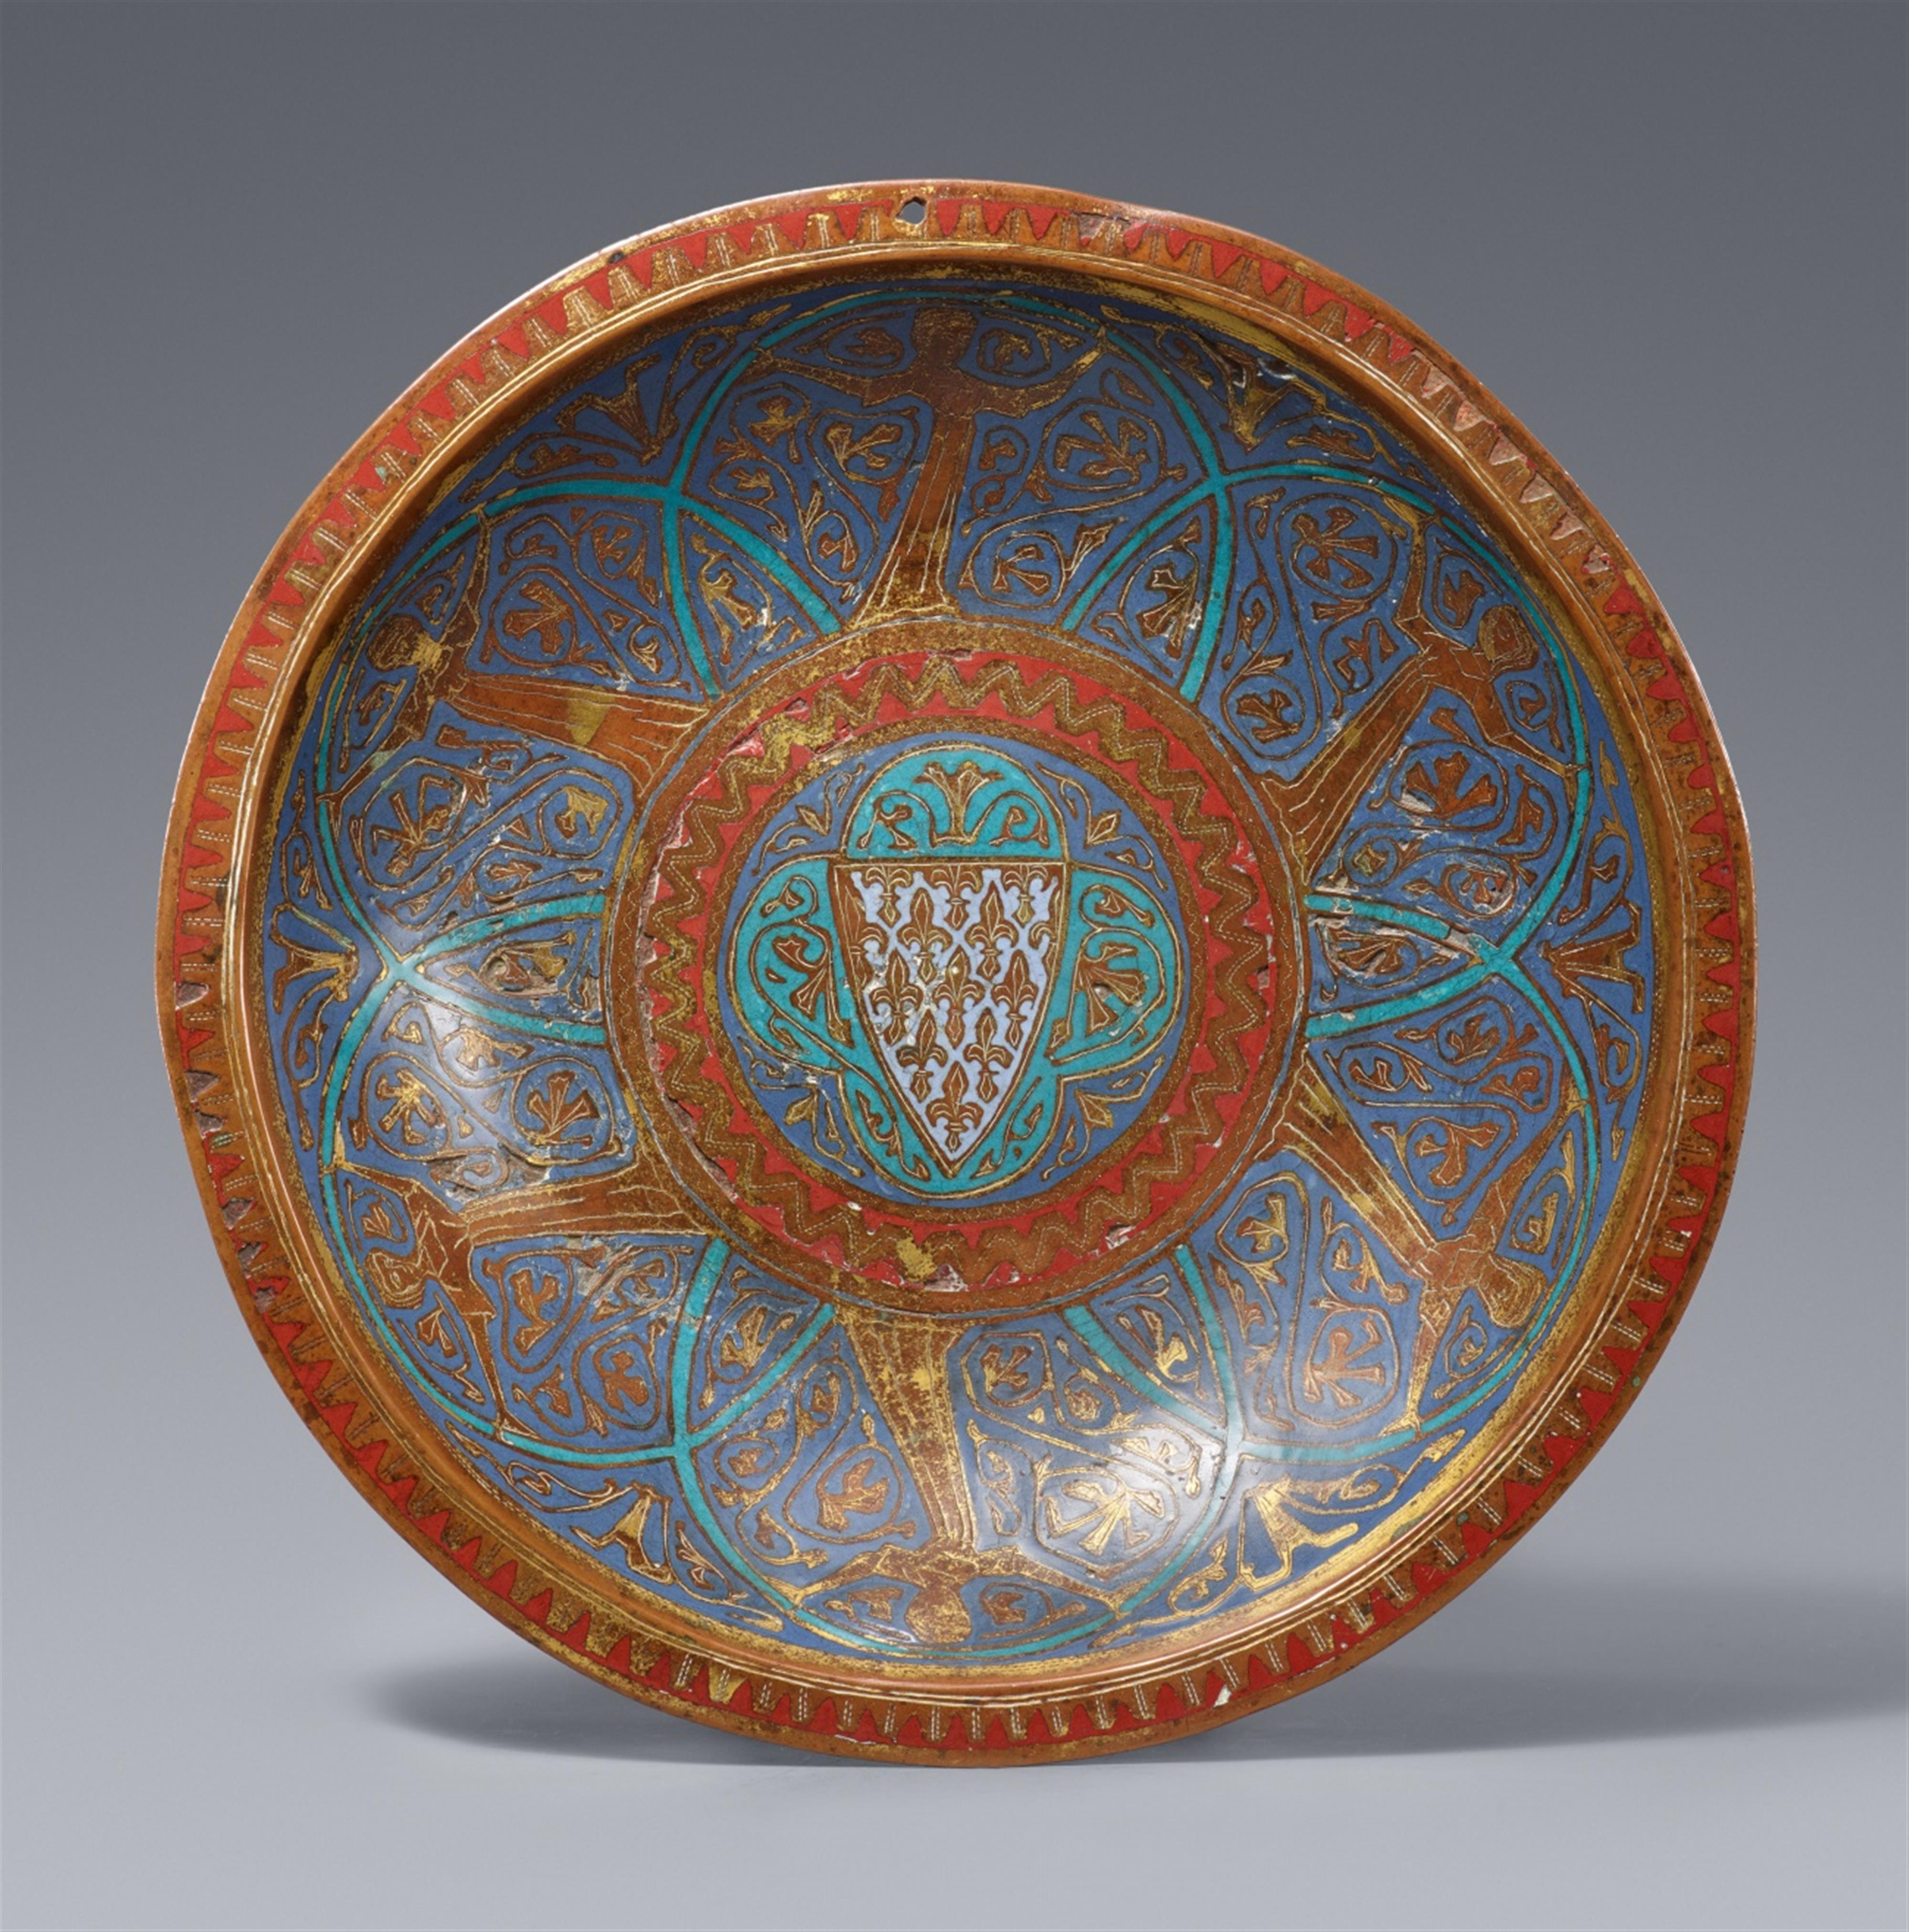 Limoges first half 13th century - An enamelled bronze dish with the French coat-of-arms - image-1